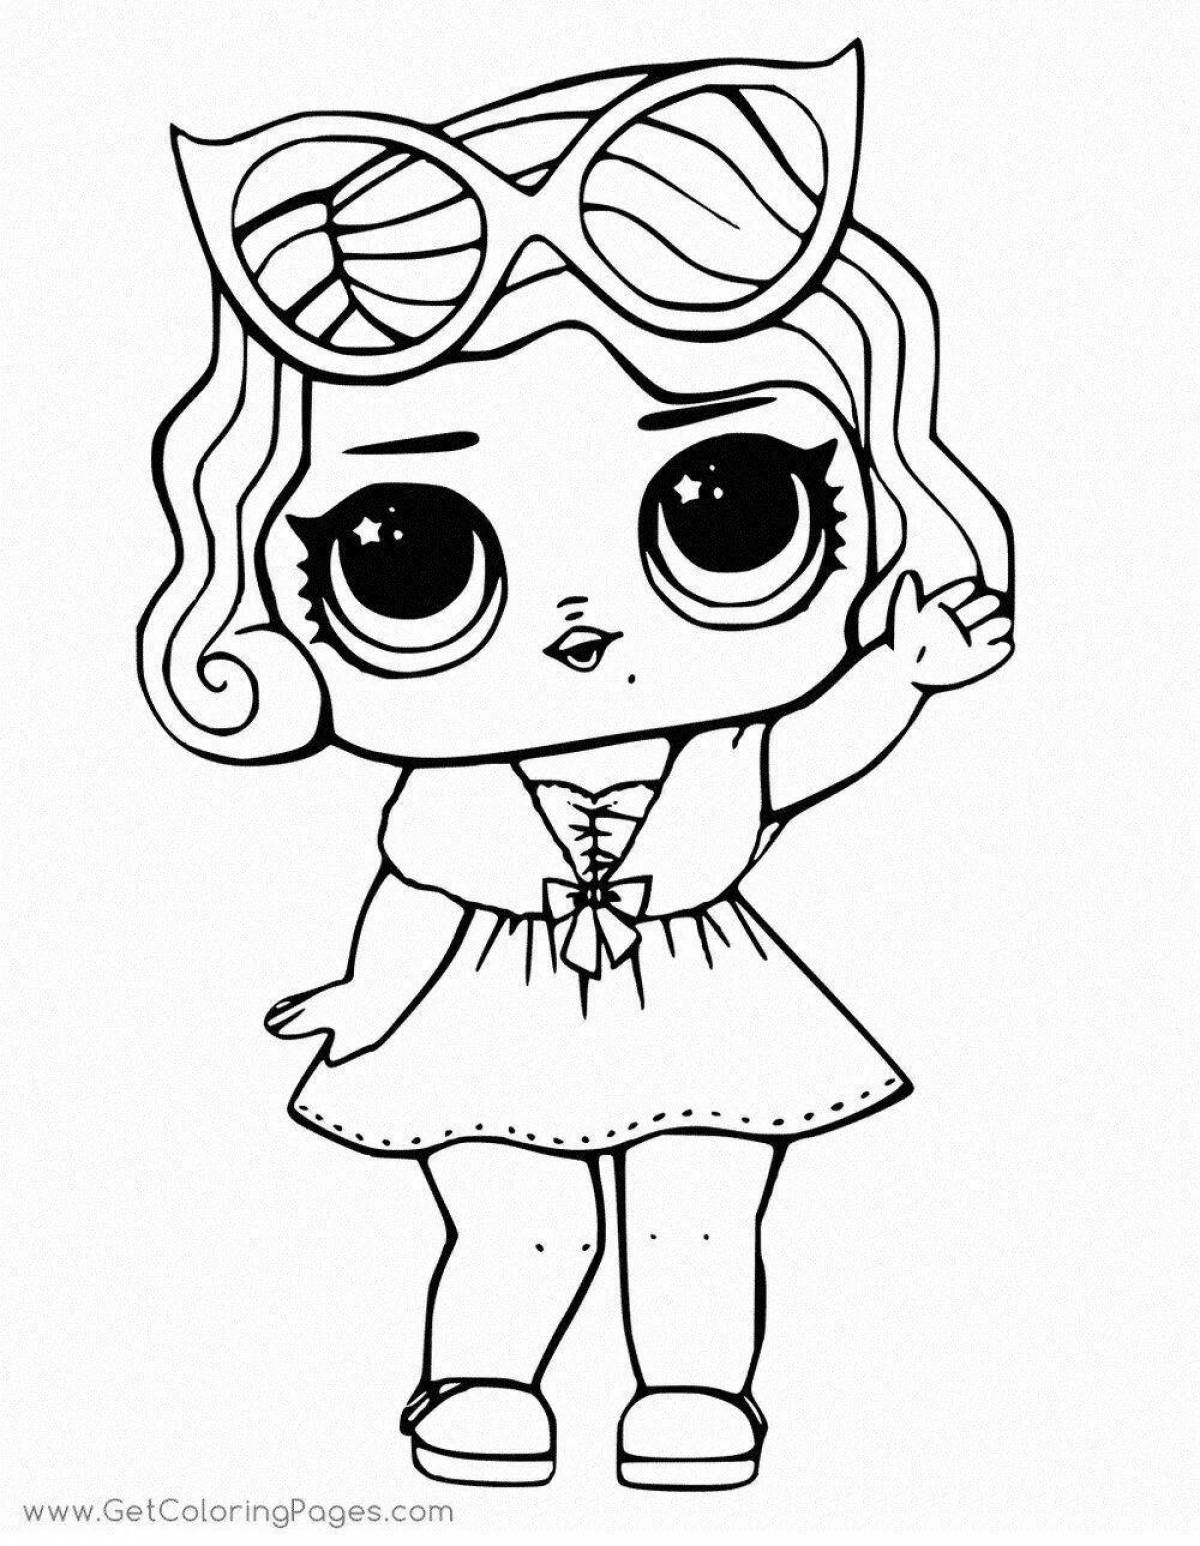 Playful coloring book for girls, lola doll